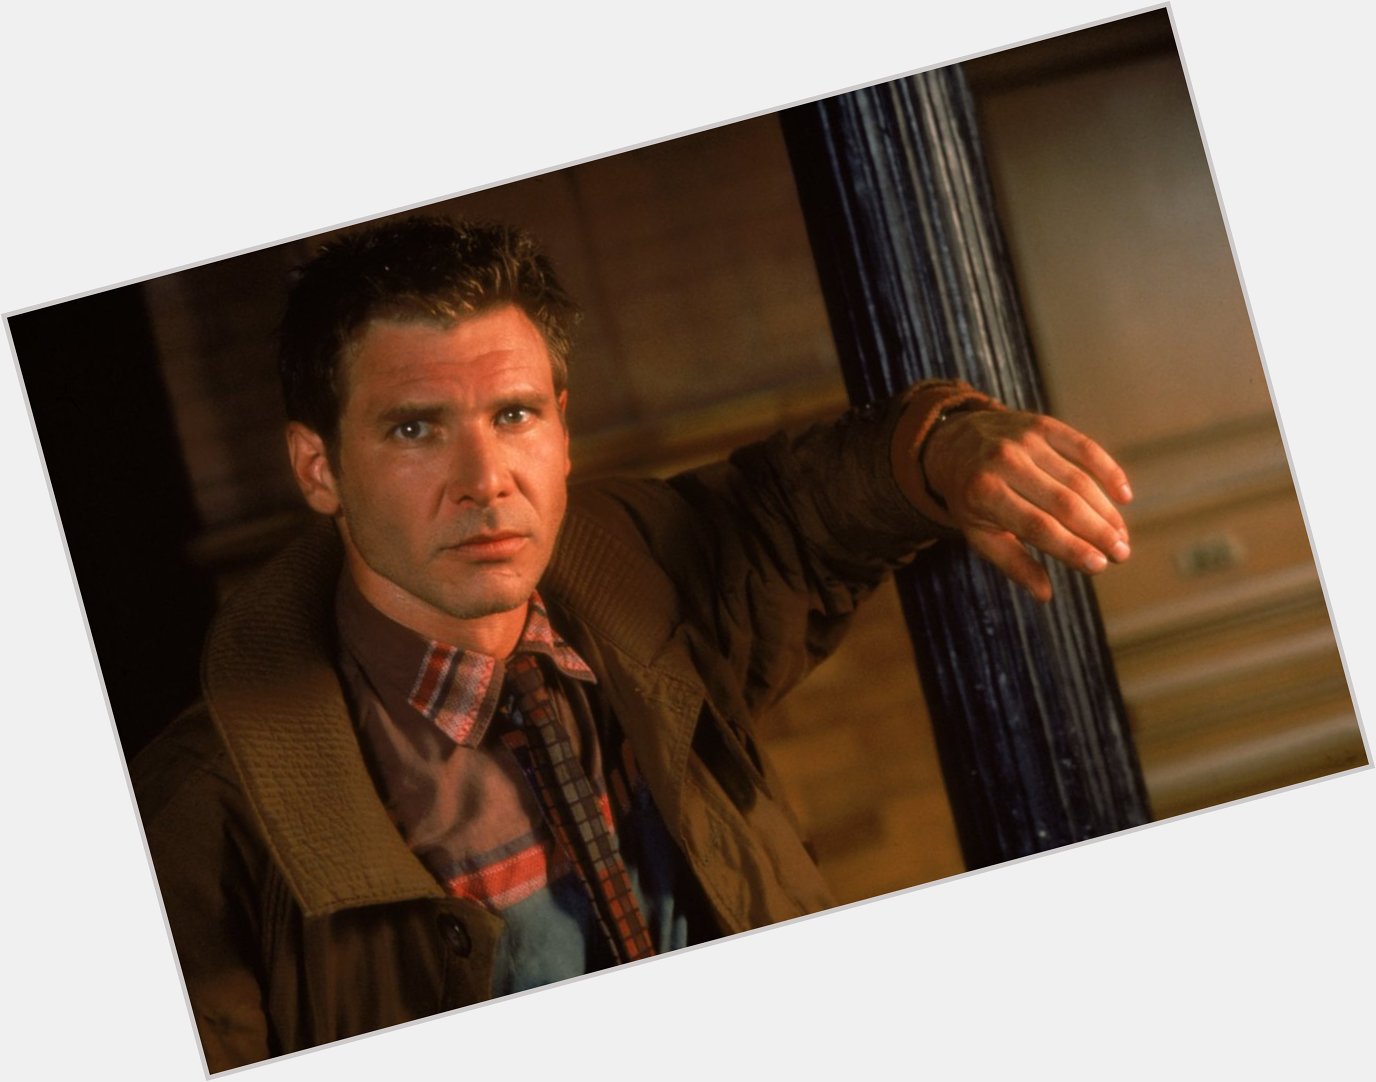 Happy birthday to our Rick Deckard Harrison Ford! 